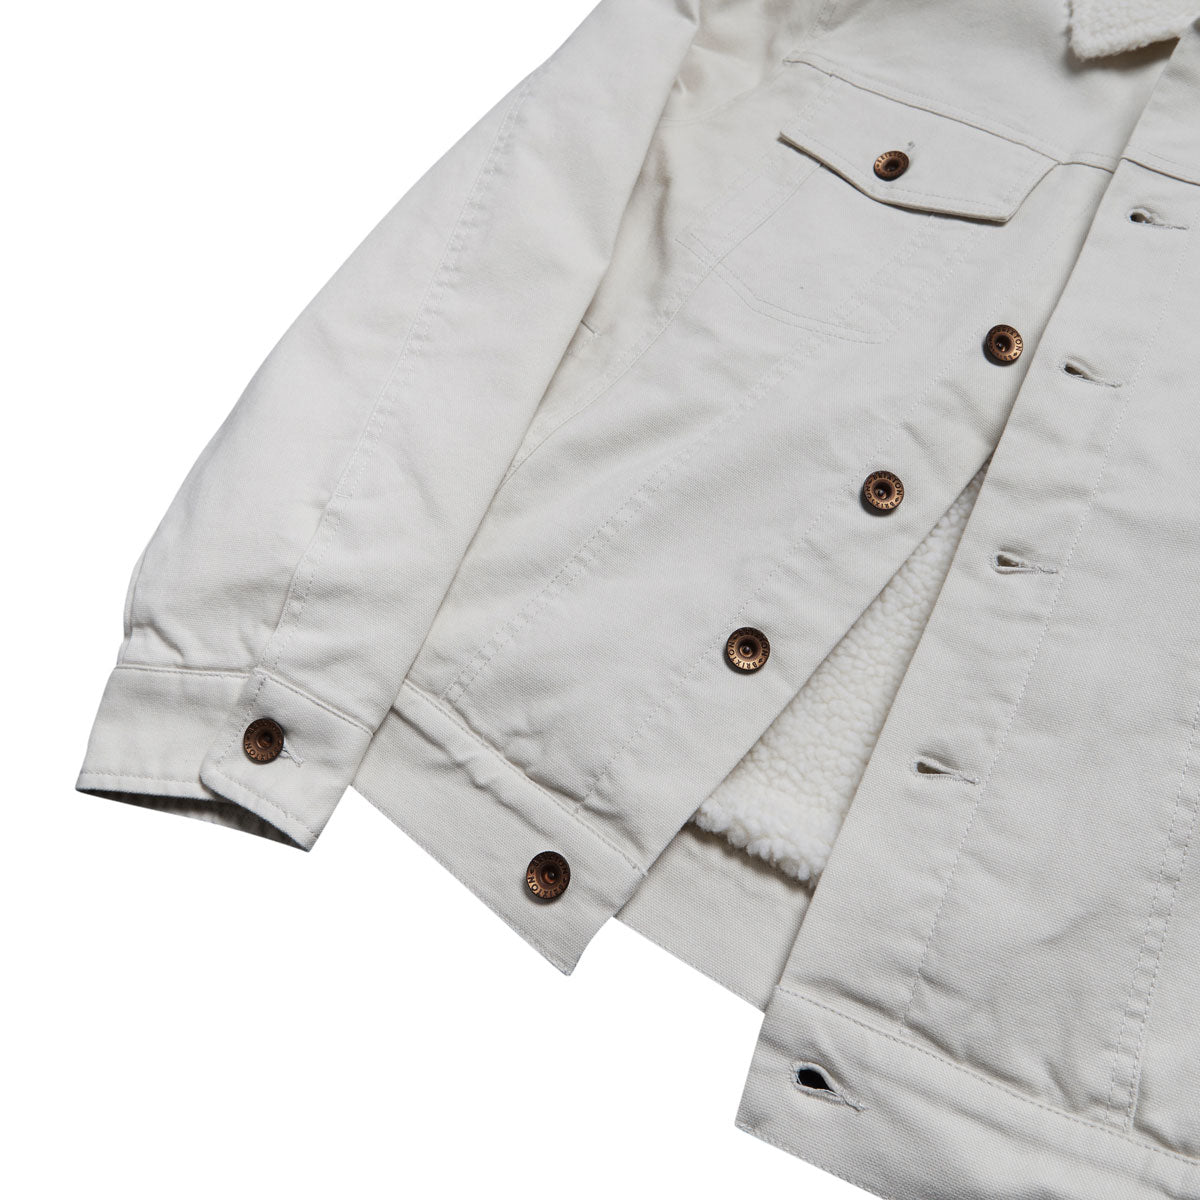 Brixton Builders Cable Lined Trucker Jacket - Natural image 3